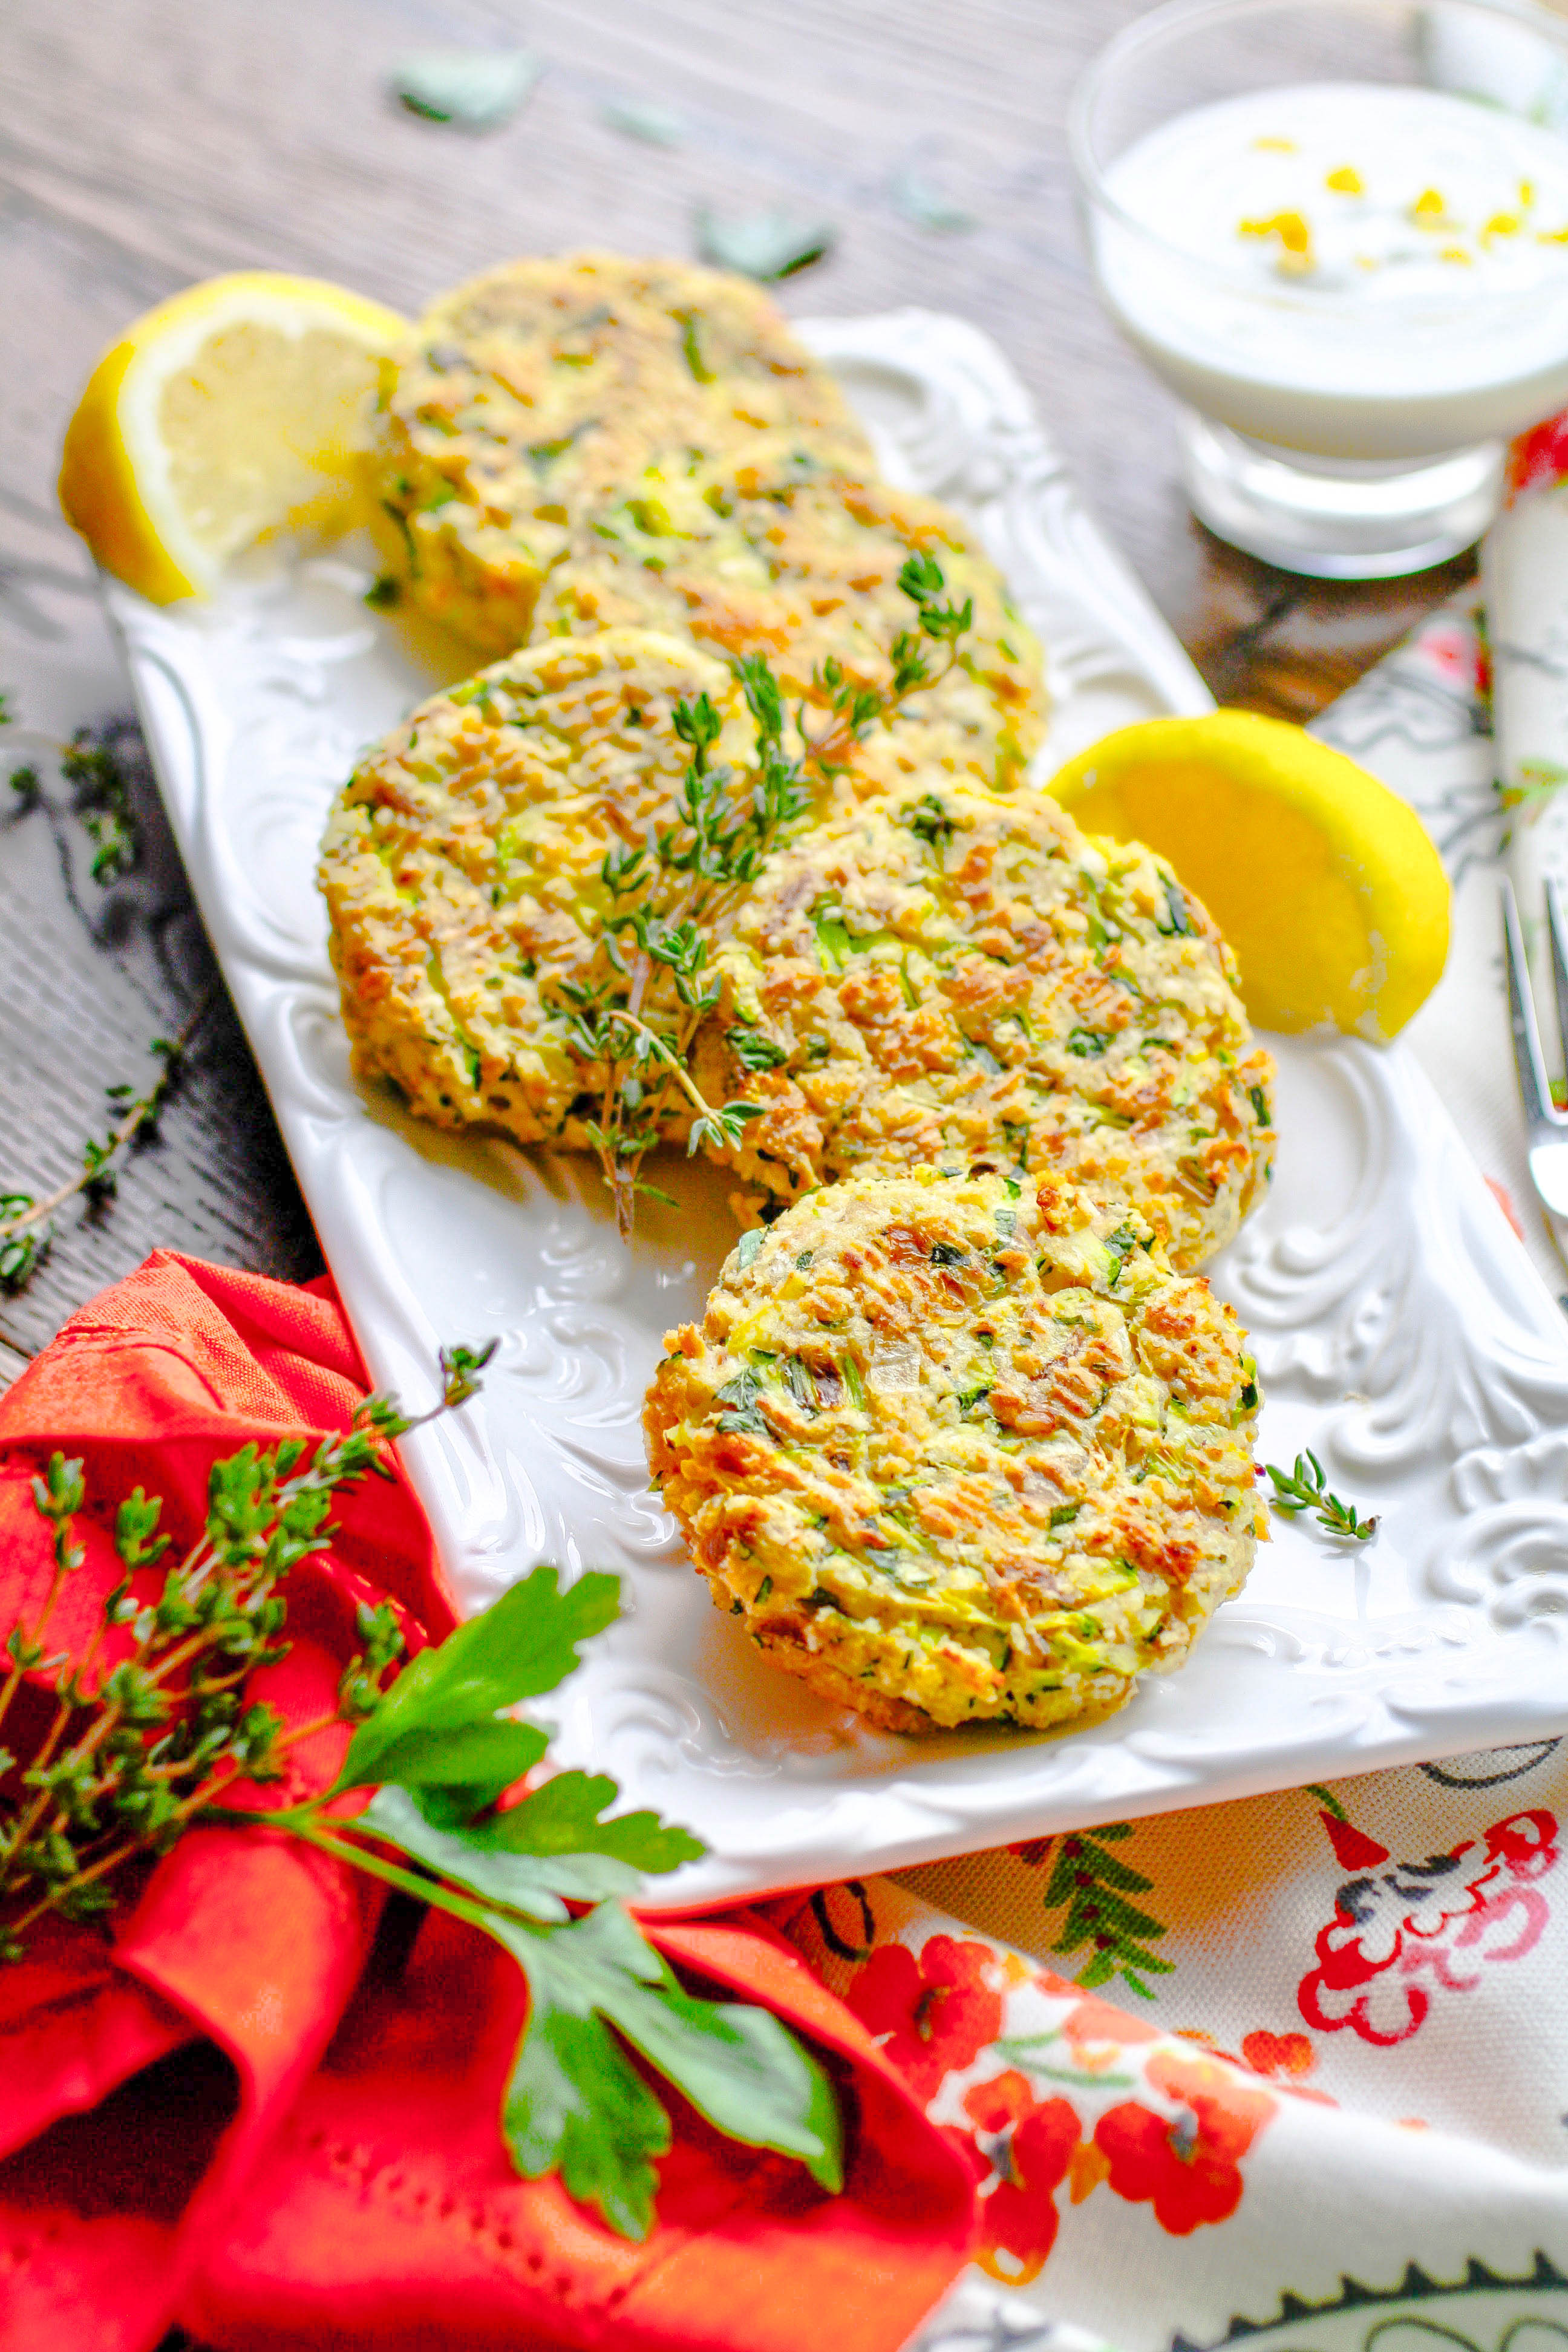 Baked Tuna and Zucchini Cakes with Lemon-Yogurt Dressing are lovely this time of year. Baked Tuna and Zucchini Cakes with Lemon-Yogurt Dressing are perfect as a snack or part of a lighter meal.